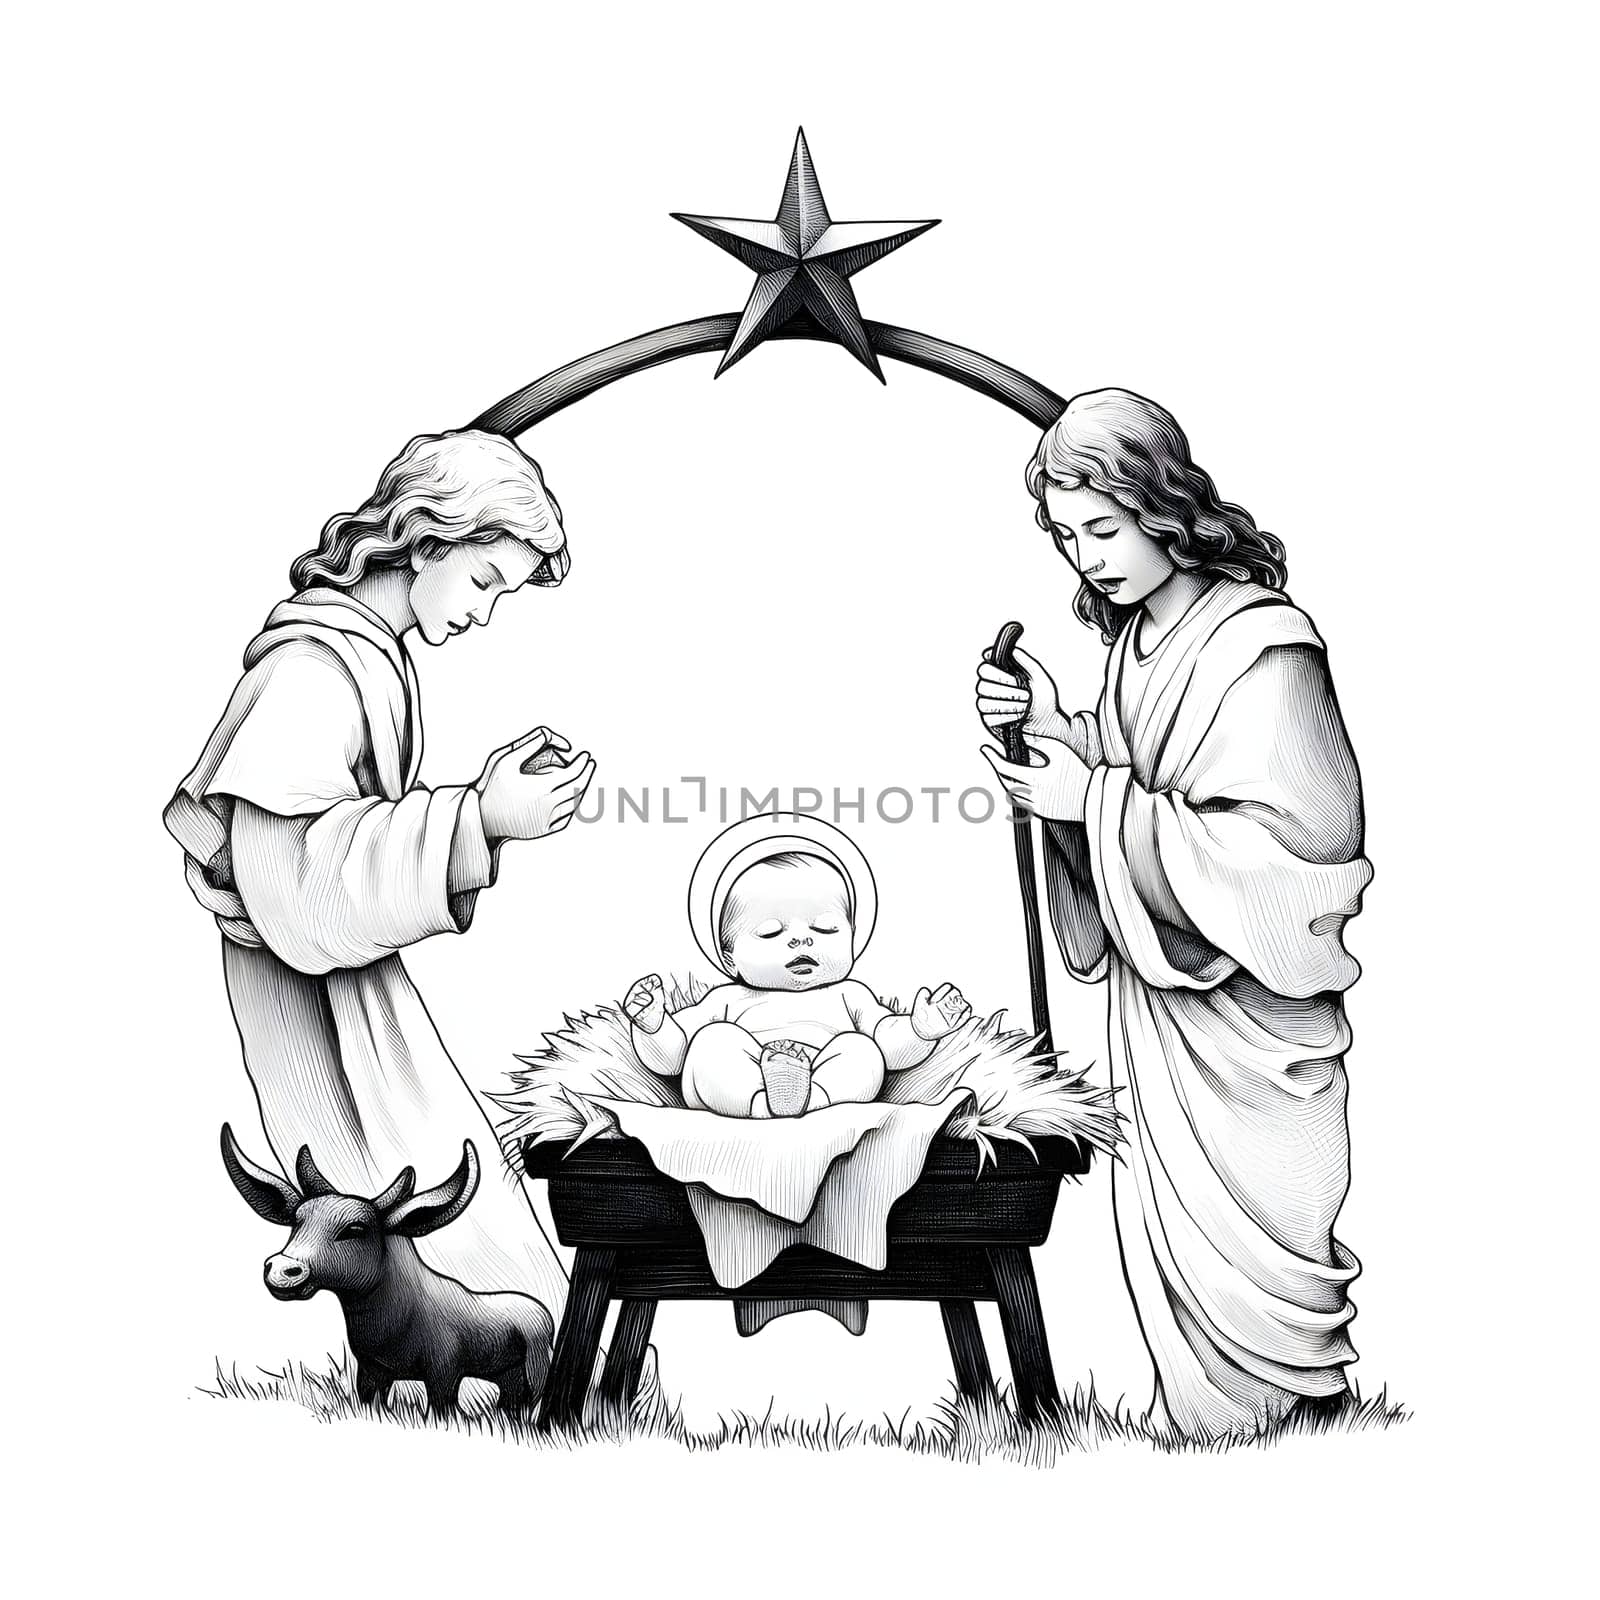 Black and White coloring sheet of a manger, a born baby and two angels. The Christmas star as a symbol of the birth of the savior. A Time of Joy and Celebration.